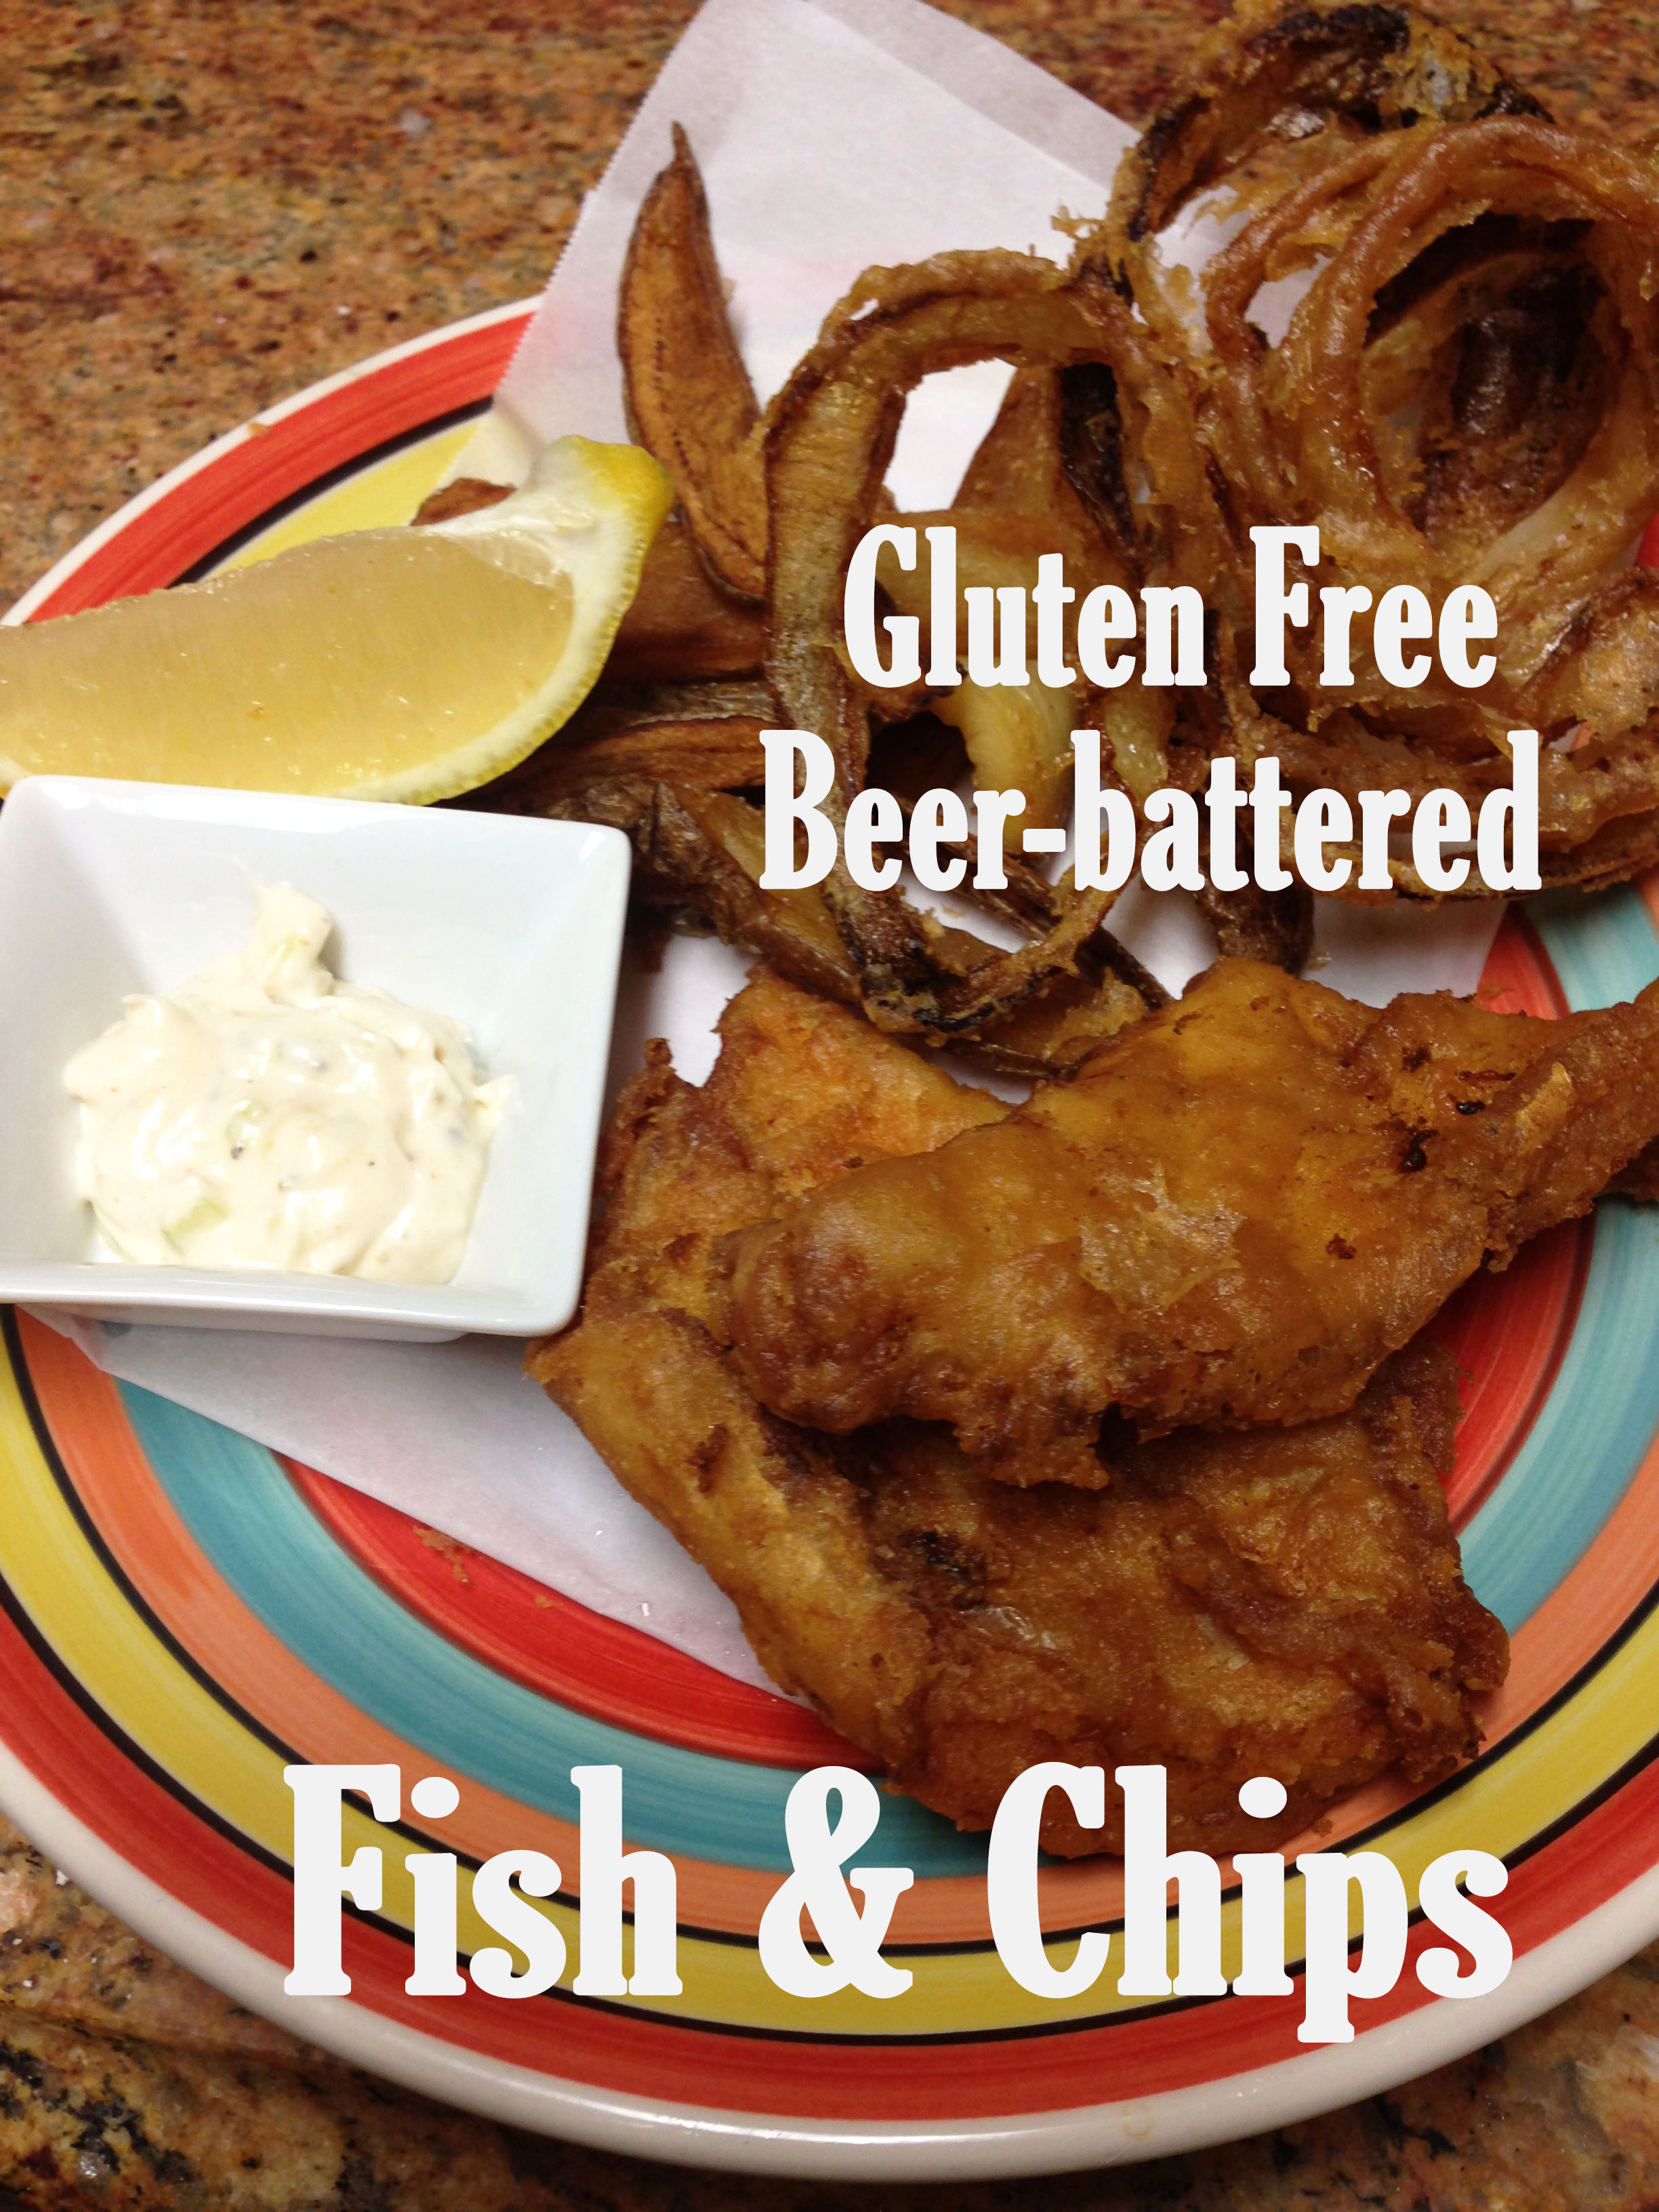 Gluten Free Beer Recipes
 Gluten Free Beer Battered Fish Fry Recipes — Dishmaps